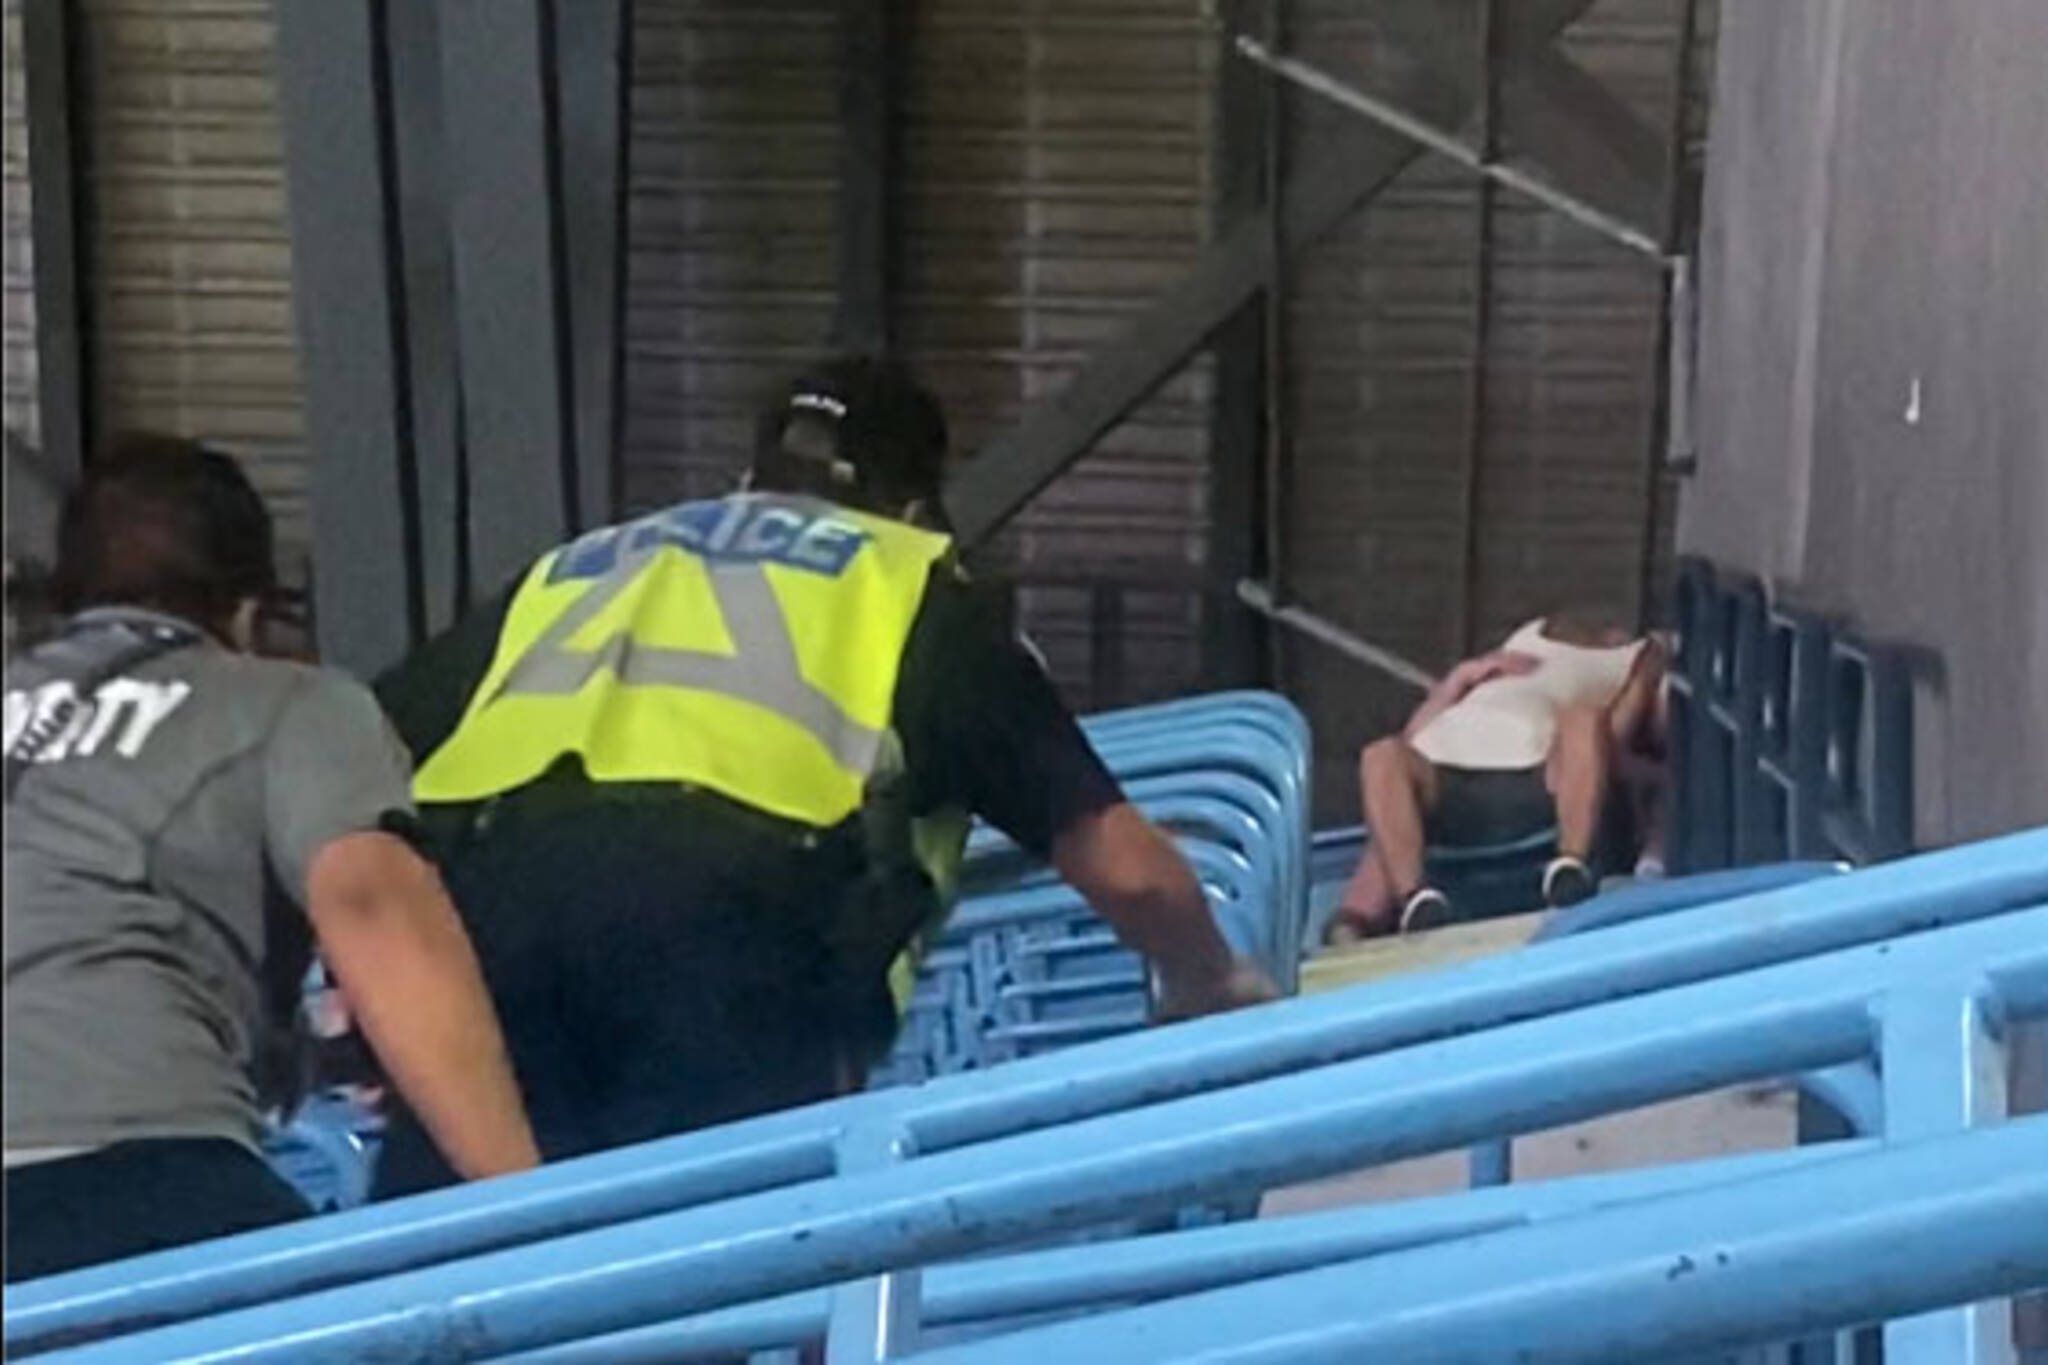 Baseball fans kicked out of stadium for allegedly having sex